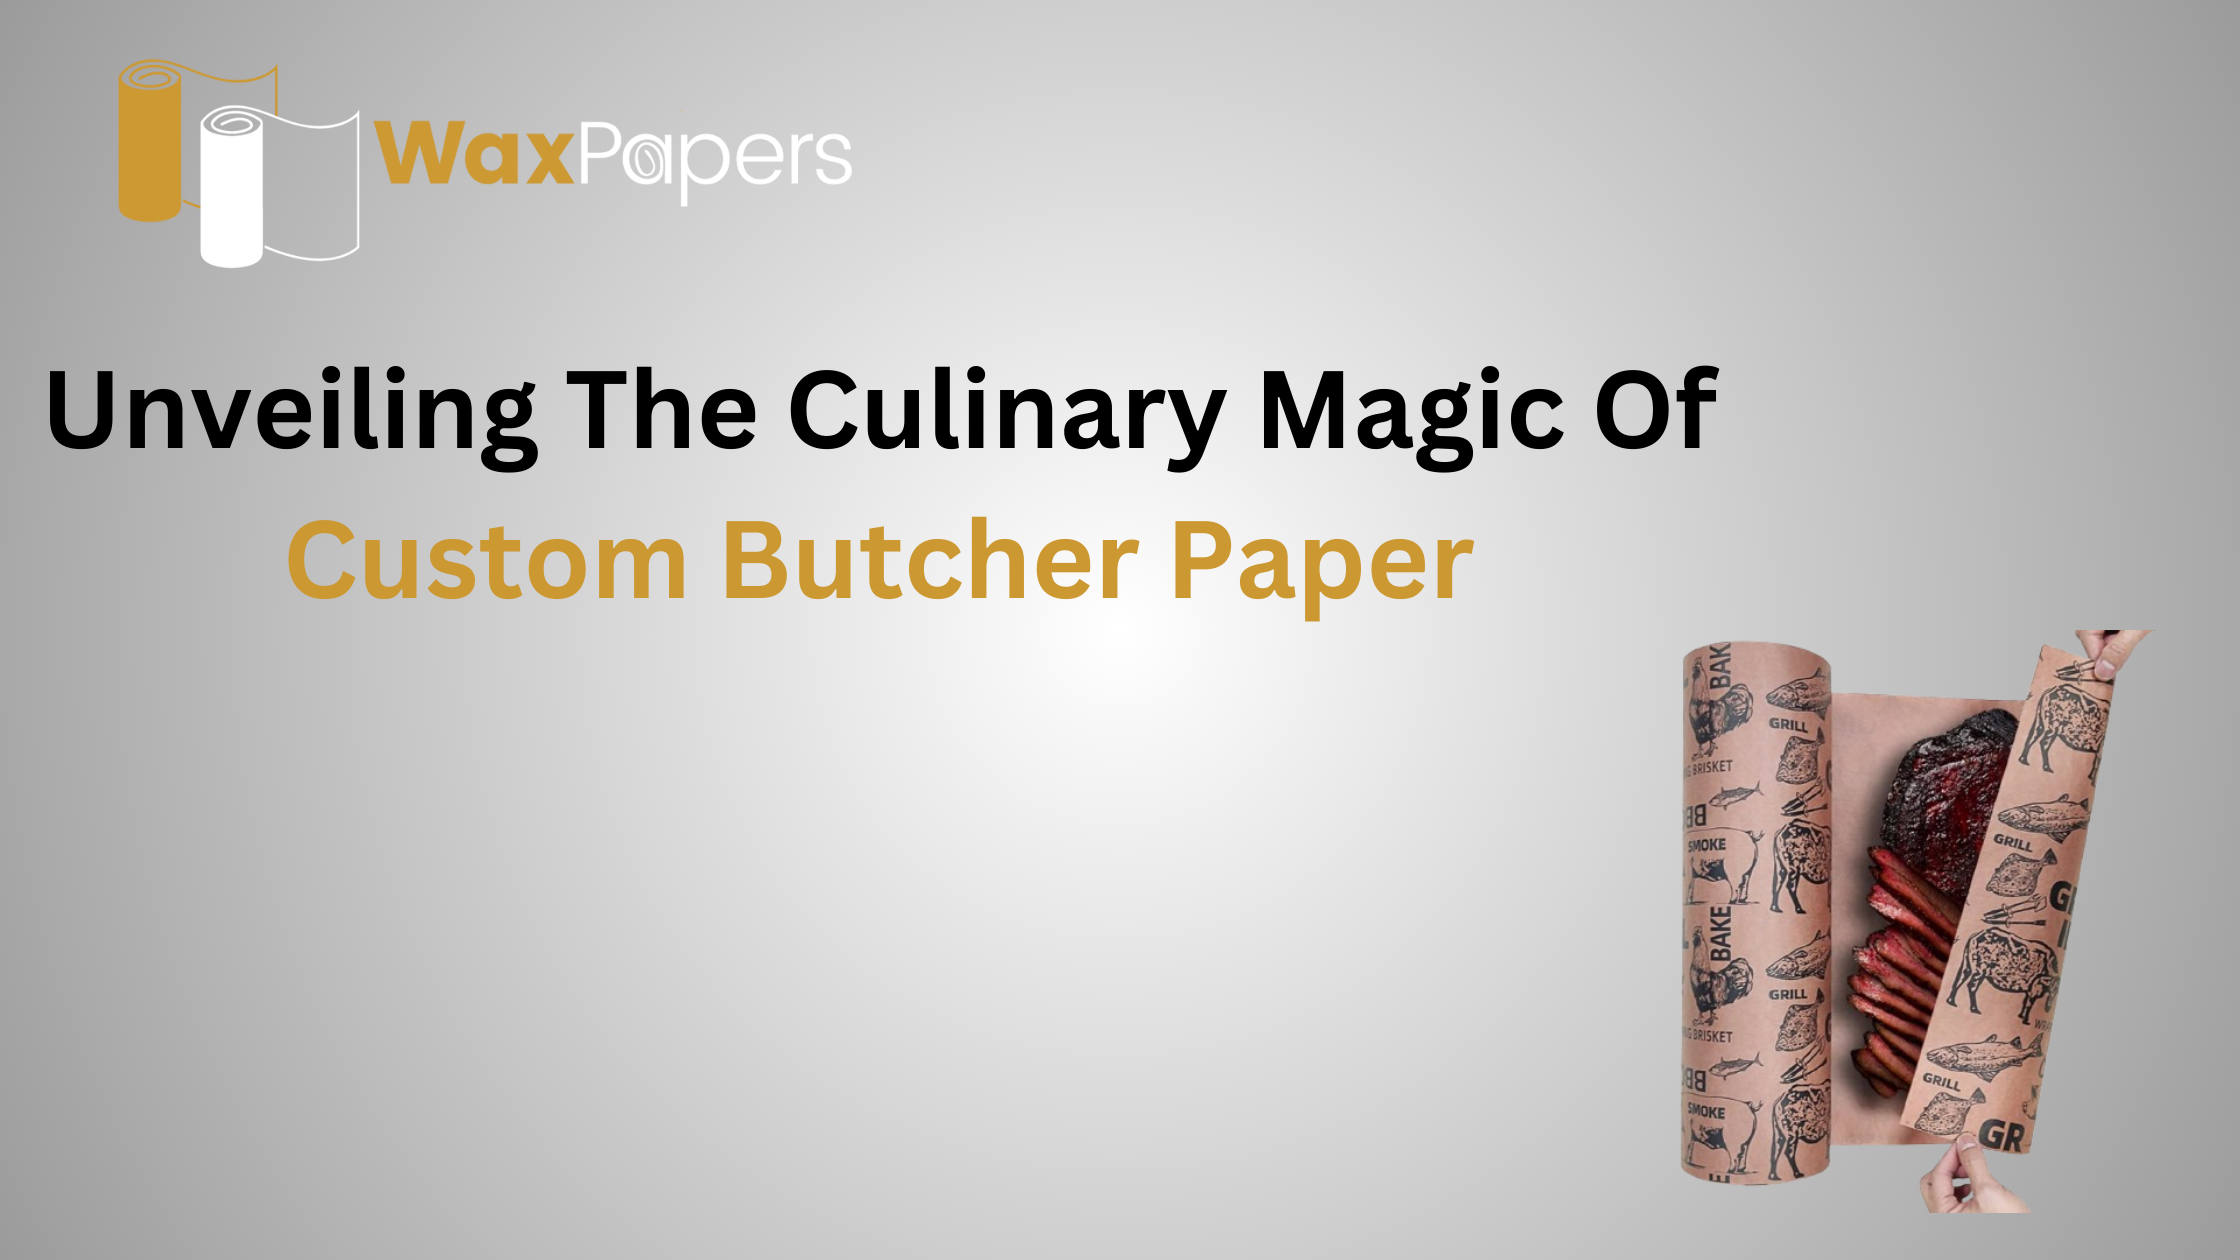 Unveiling The Culinary Magic Of Custom Butcher Paper